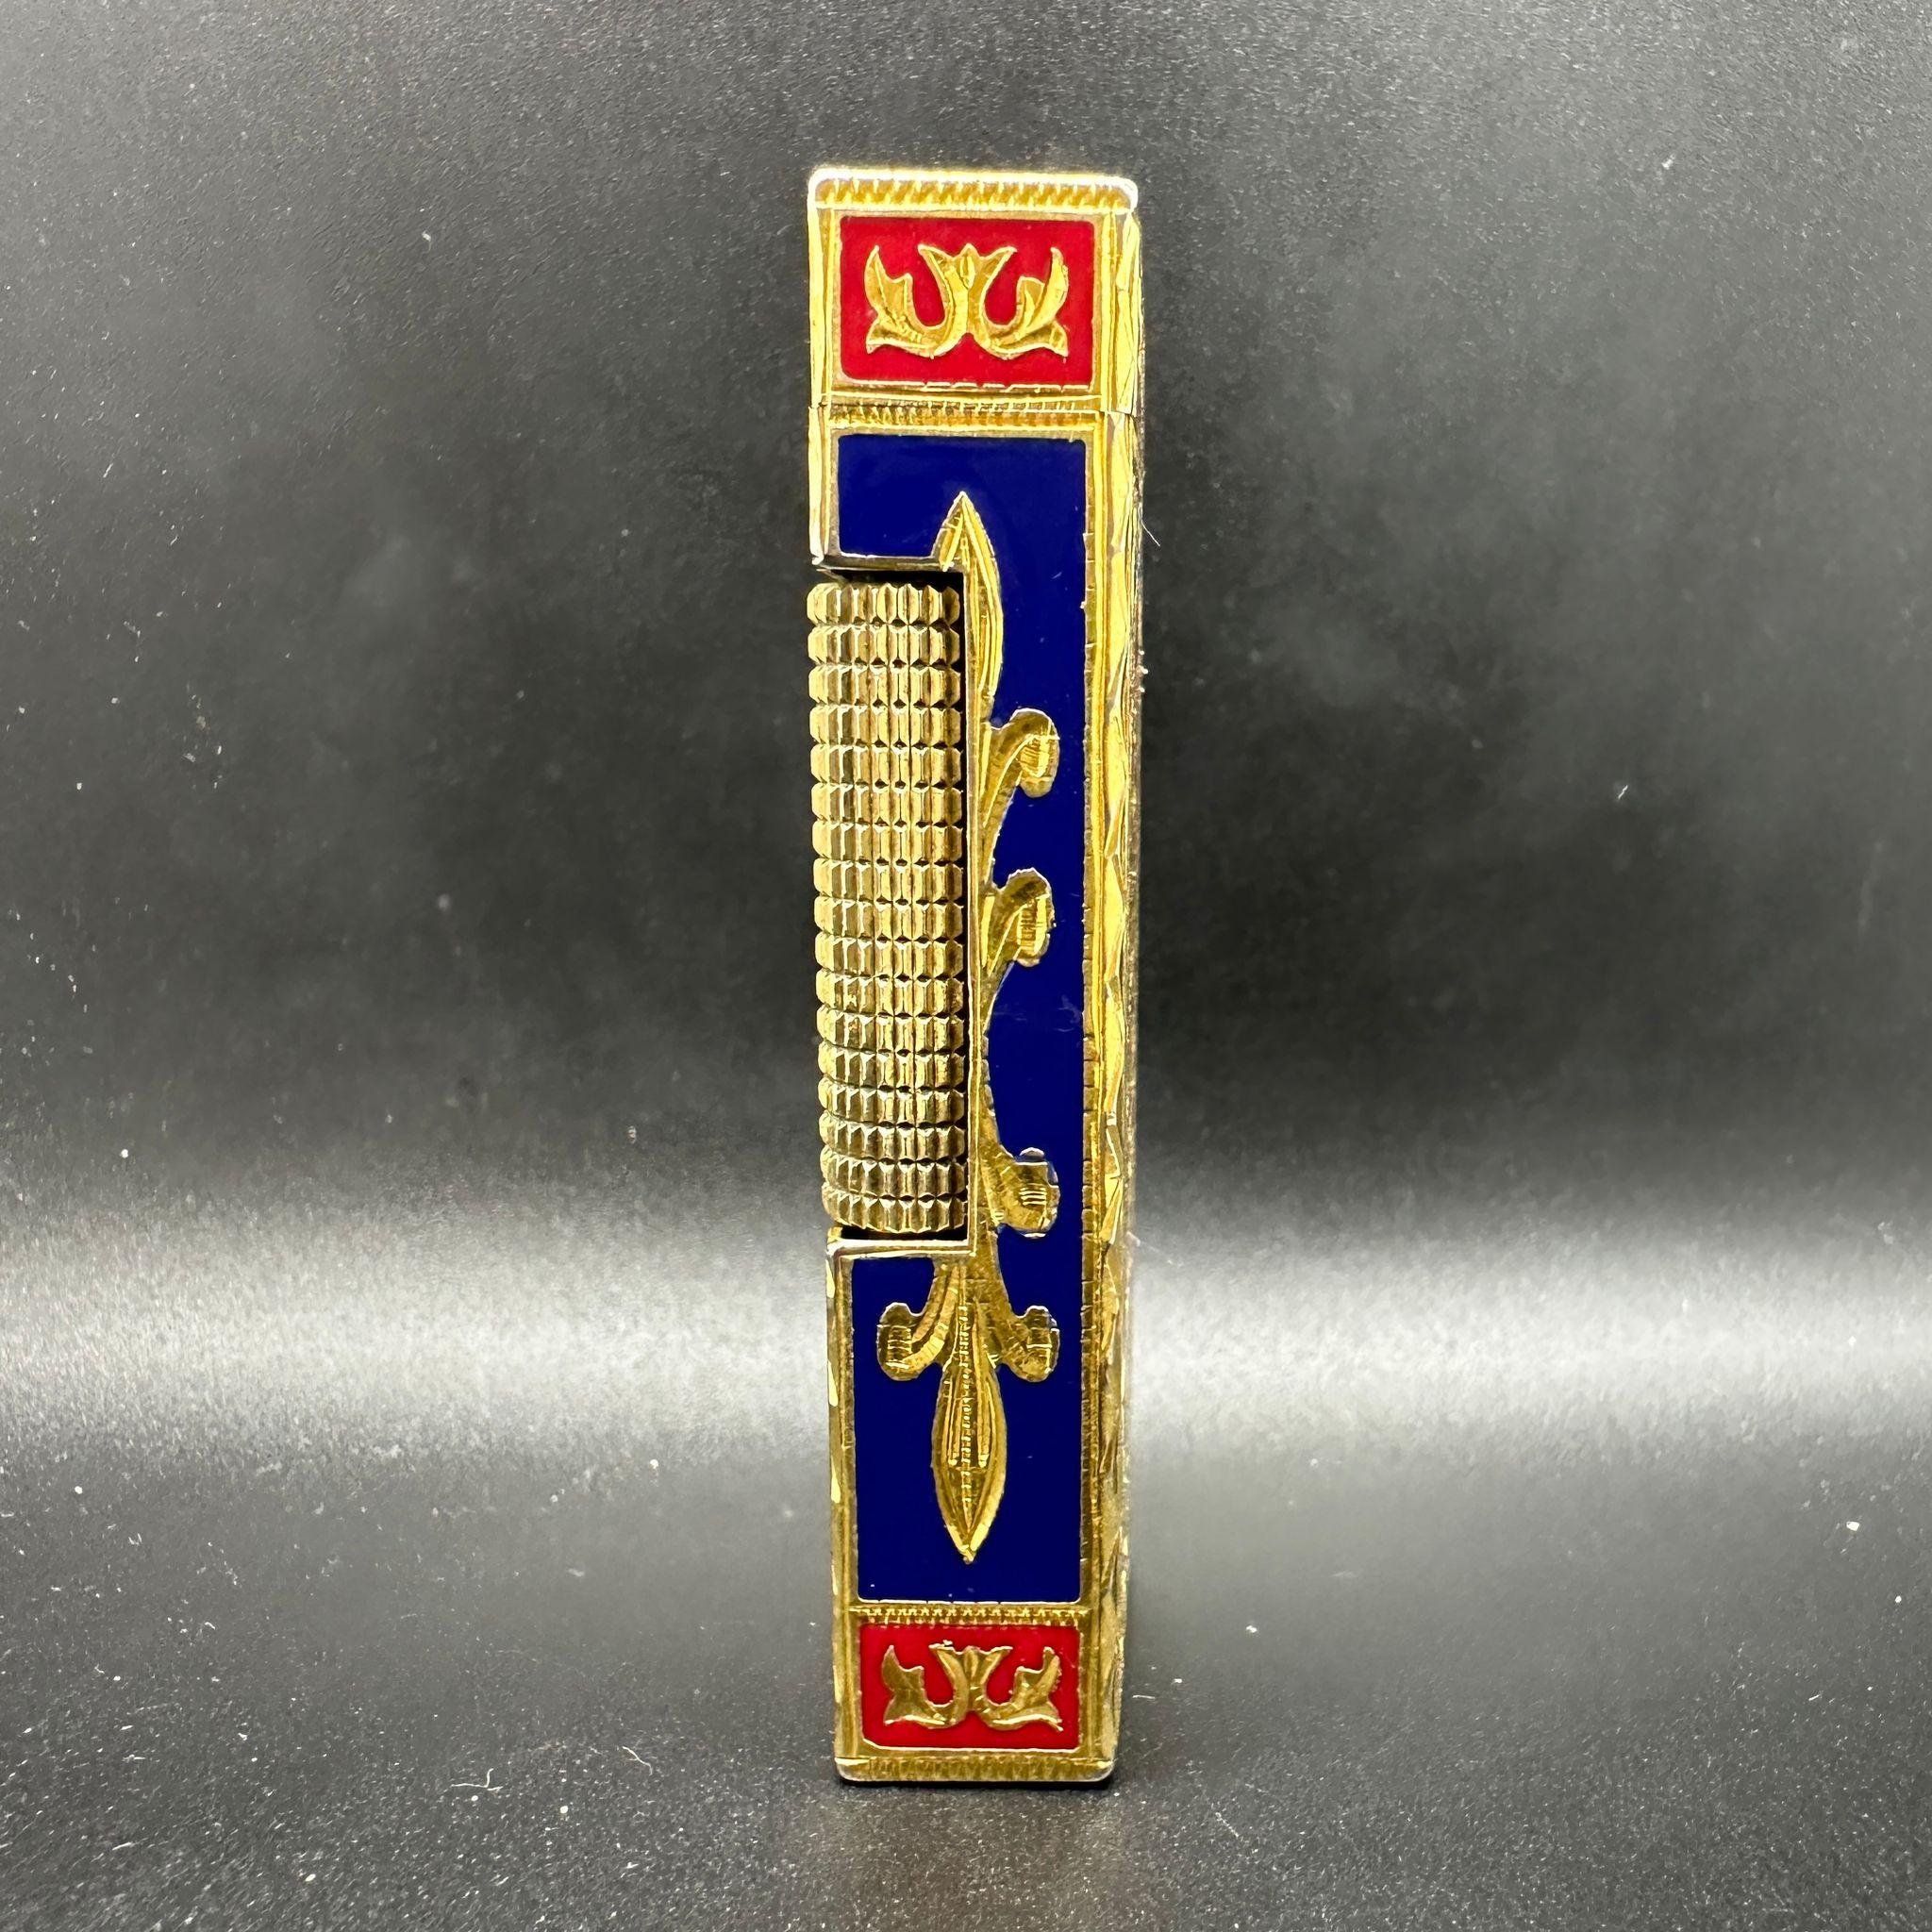 Cartier “Royking” lighter.
Circe 1970
CARTIER  Roy King Rollagas, a Unique RARE example of a ROYKING designed Cartier Rollagas lighter made circa 1970's, 18K Gold Baroque Inlay with Red and Blue  lacquer, mint condition.
Roy King emblem on top side